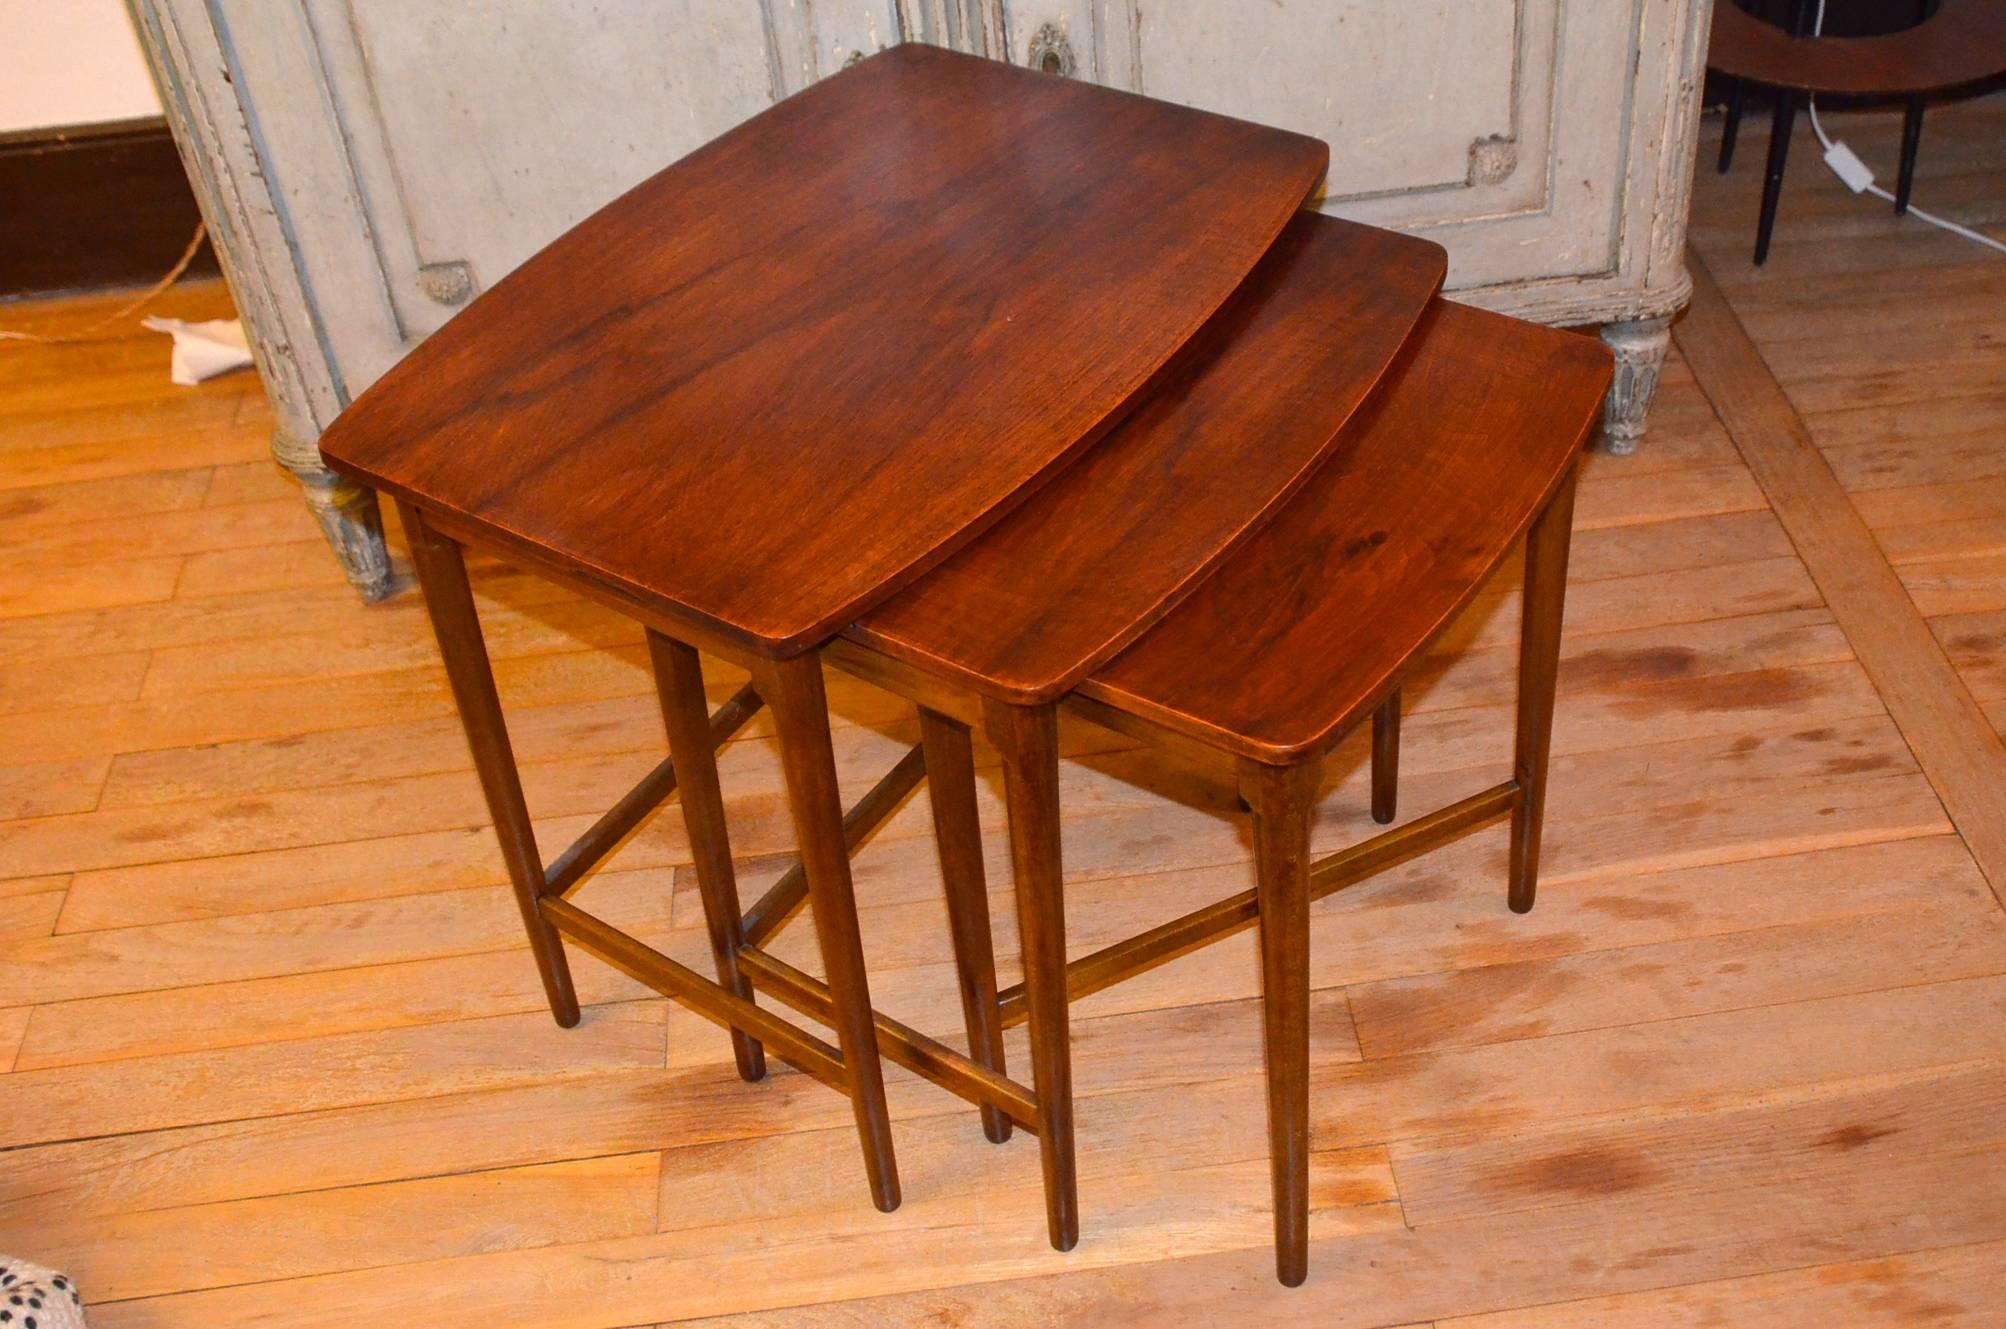 A beautiful set of three nesting tables in rosewood for Danish furniture lovers. They are in perfect conditions.

On the bottom of the bigger table 2 FH red stamps and dated 5/12/1952.

Dimension of bigger table is:

59.5 cm x 43 cm, height 54